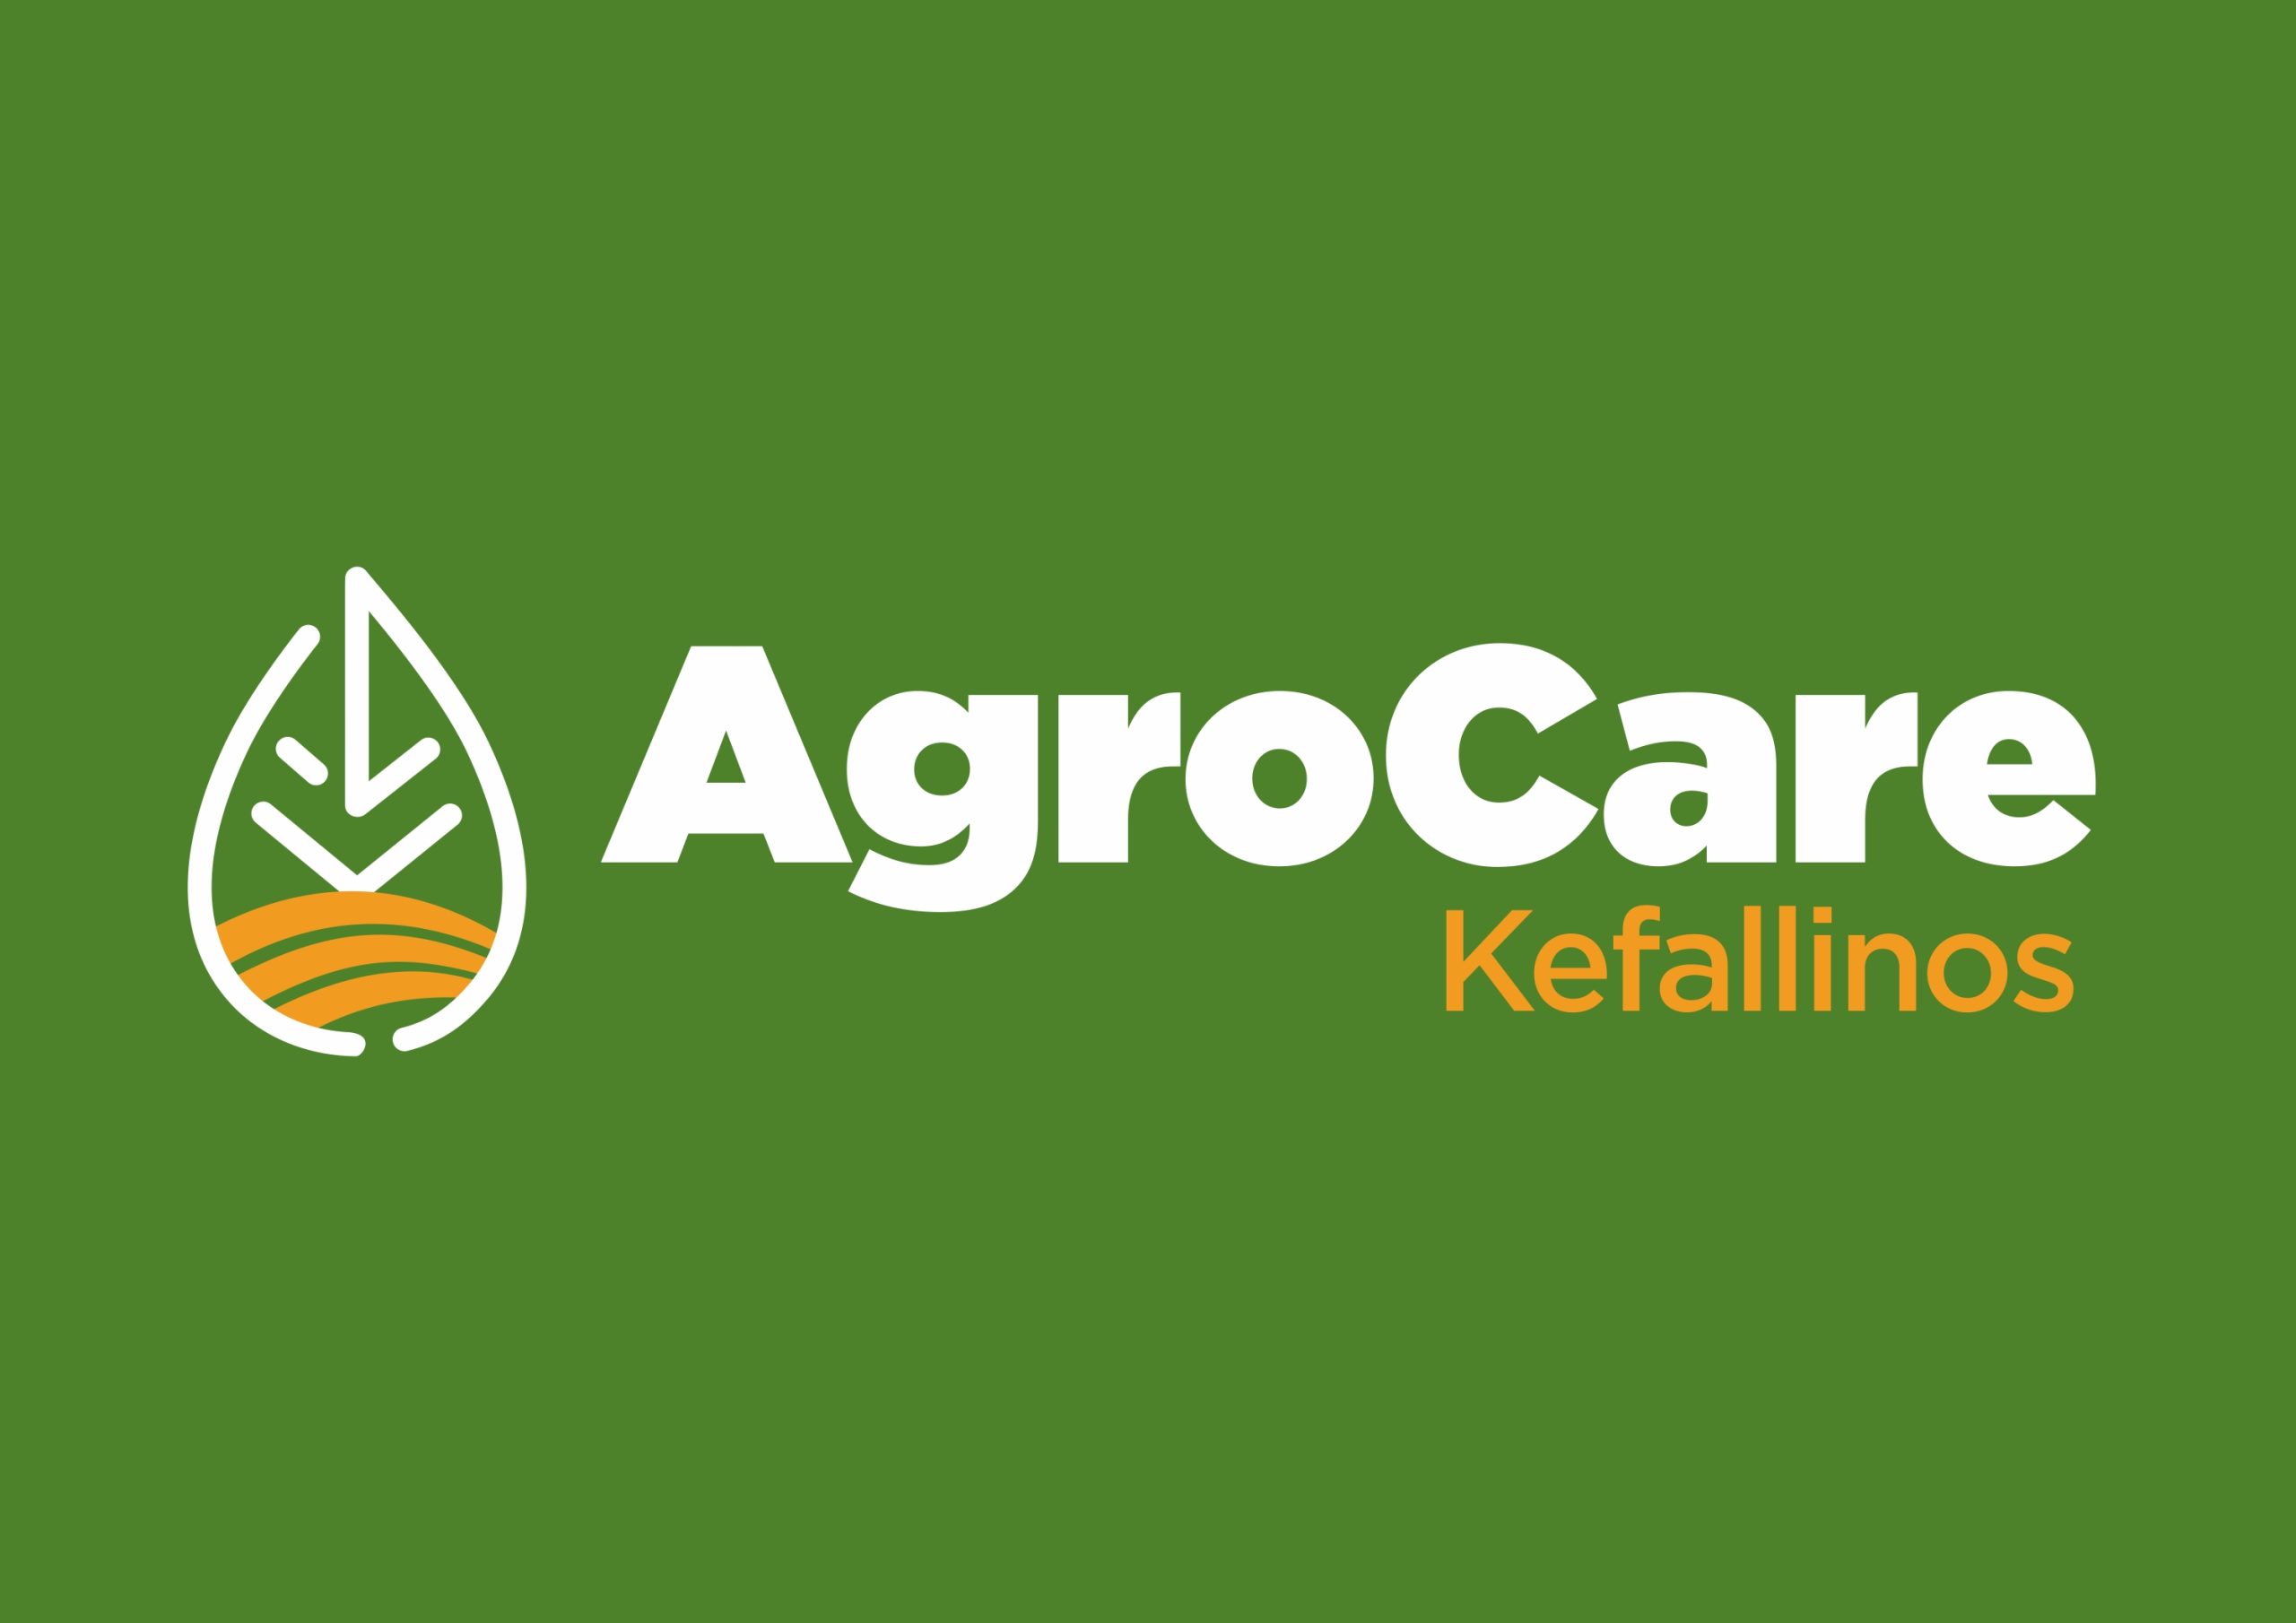 Agrocare